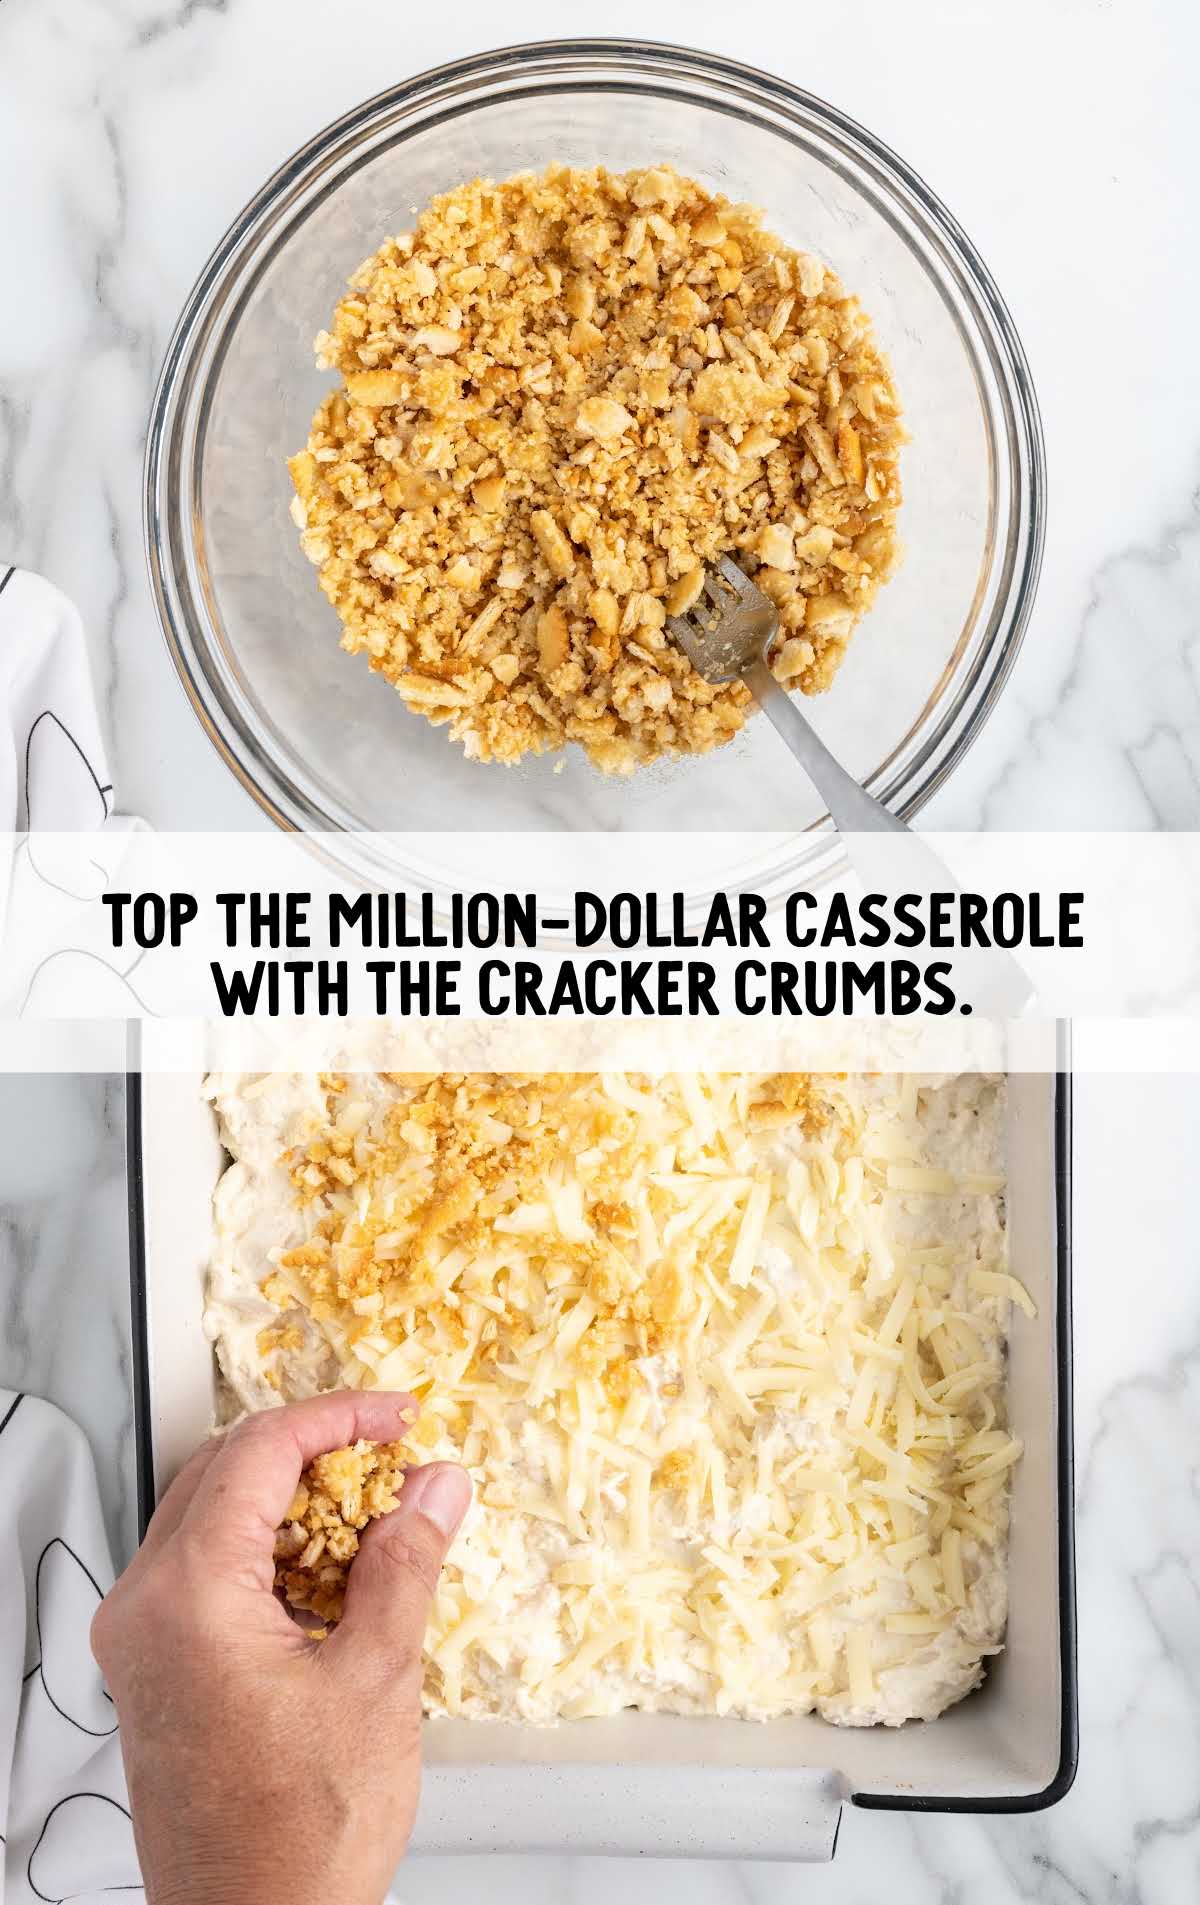 crackers crumbs topped on top of the casserole